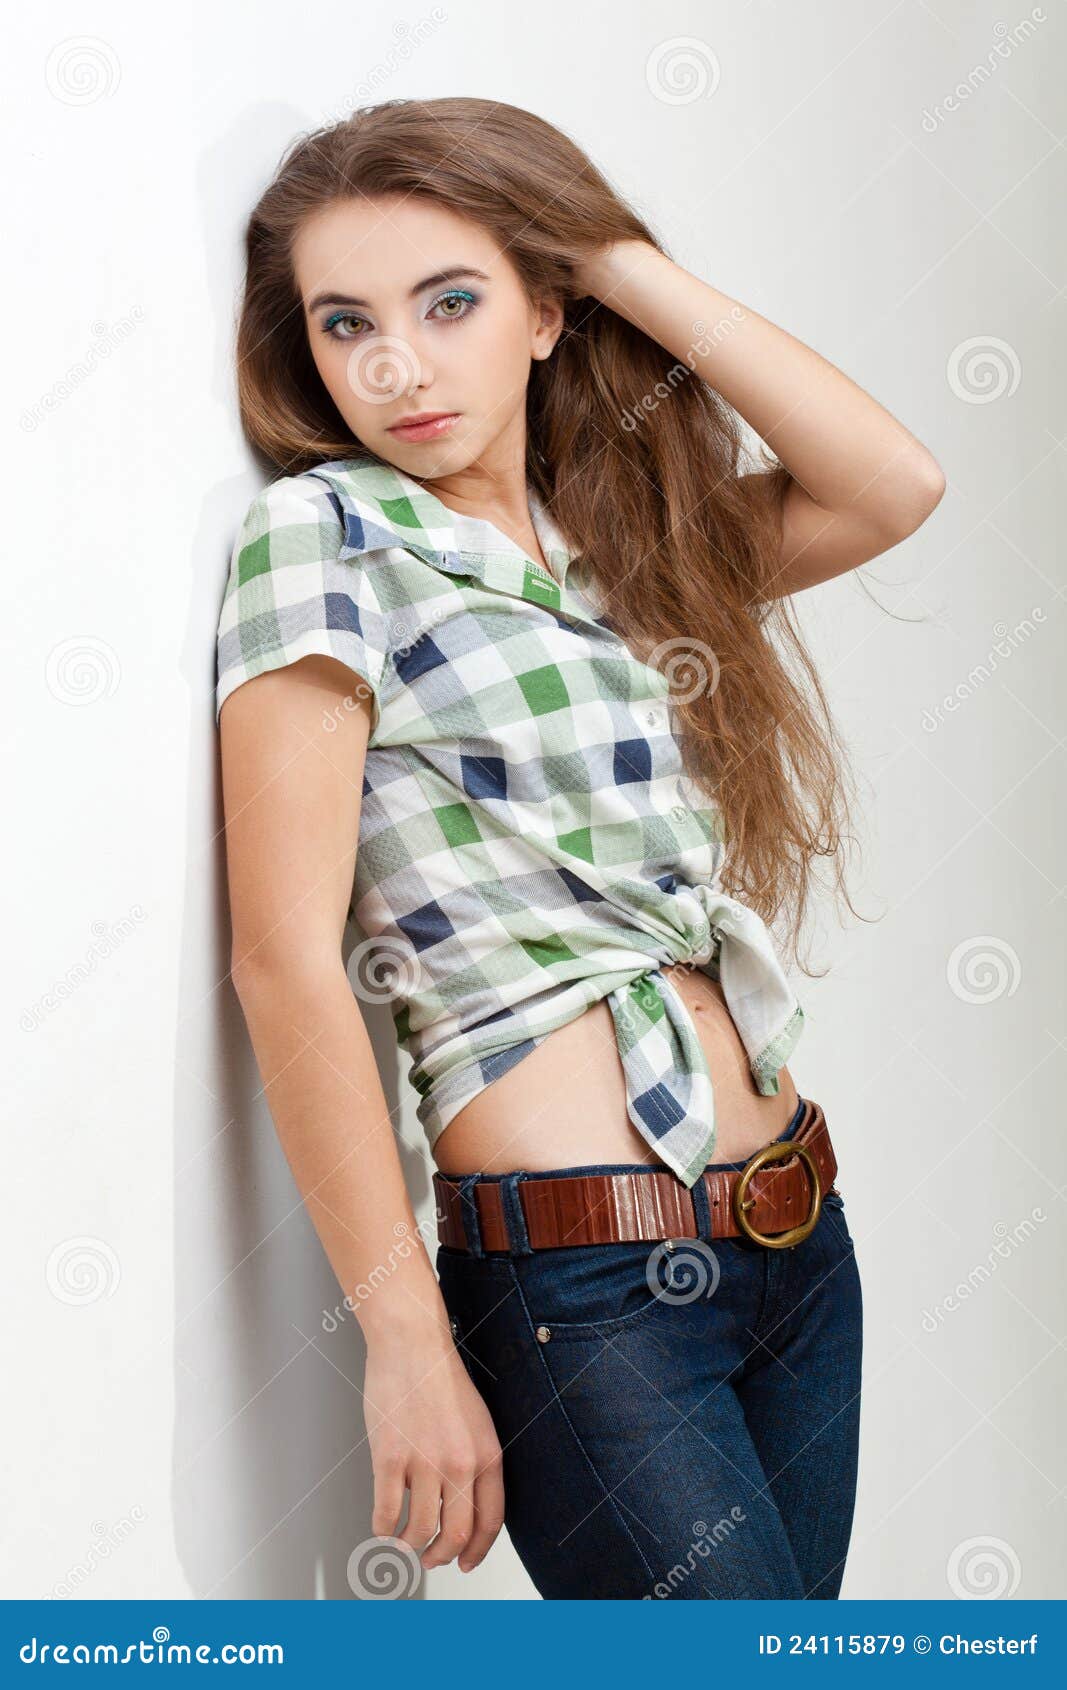 Woman Wearing Country Style Clothes Near Wall Stock Image - Image of ...